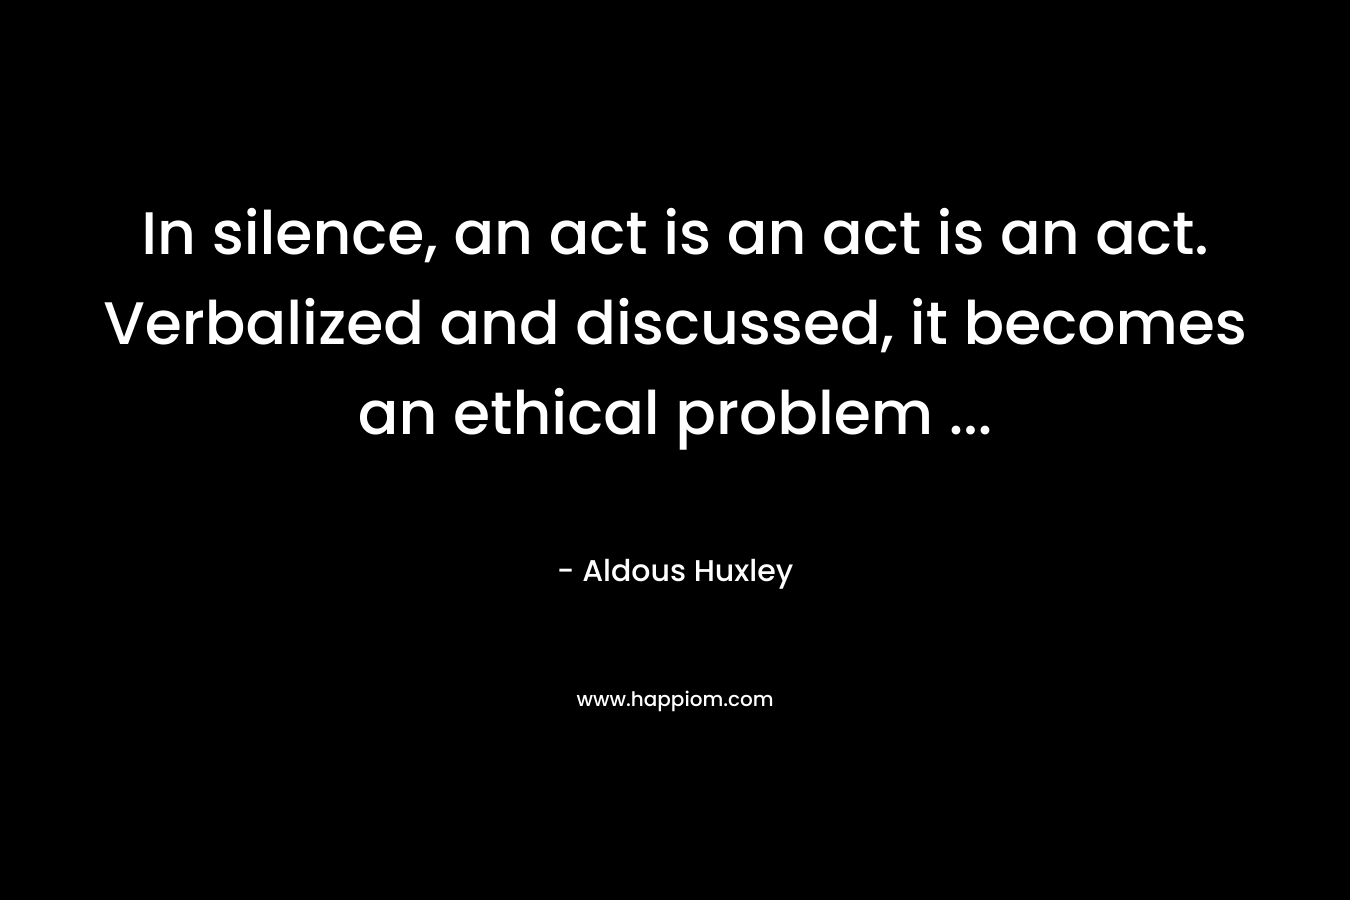 In silence, an act is an act is an act. Verbalized and discussed, it becomes an ethical problem ...